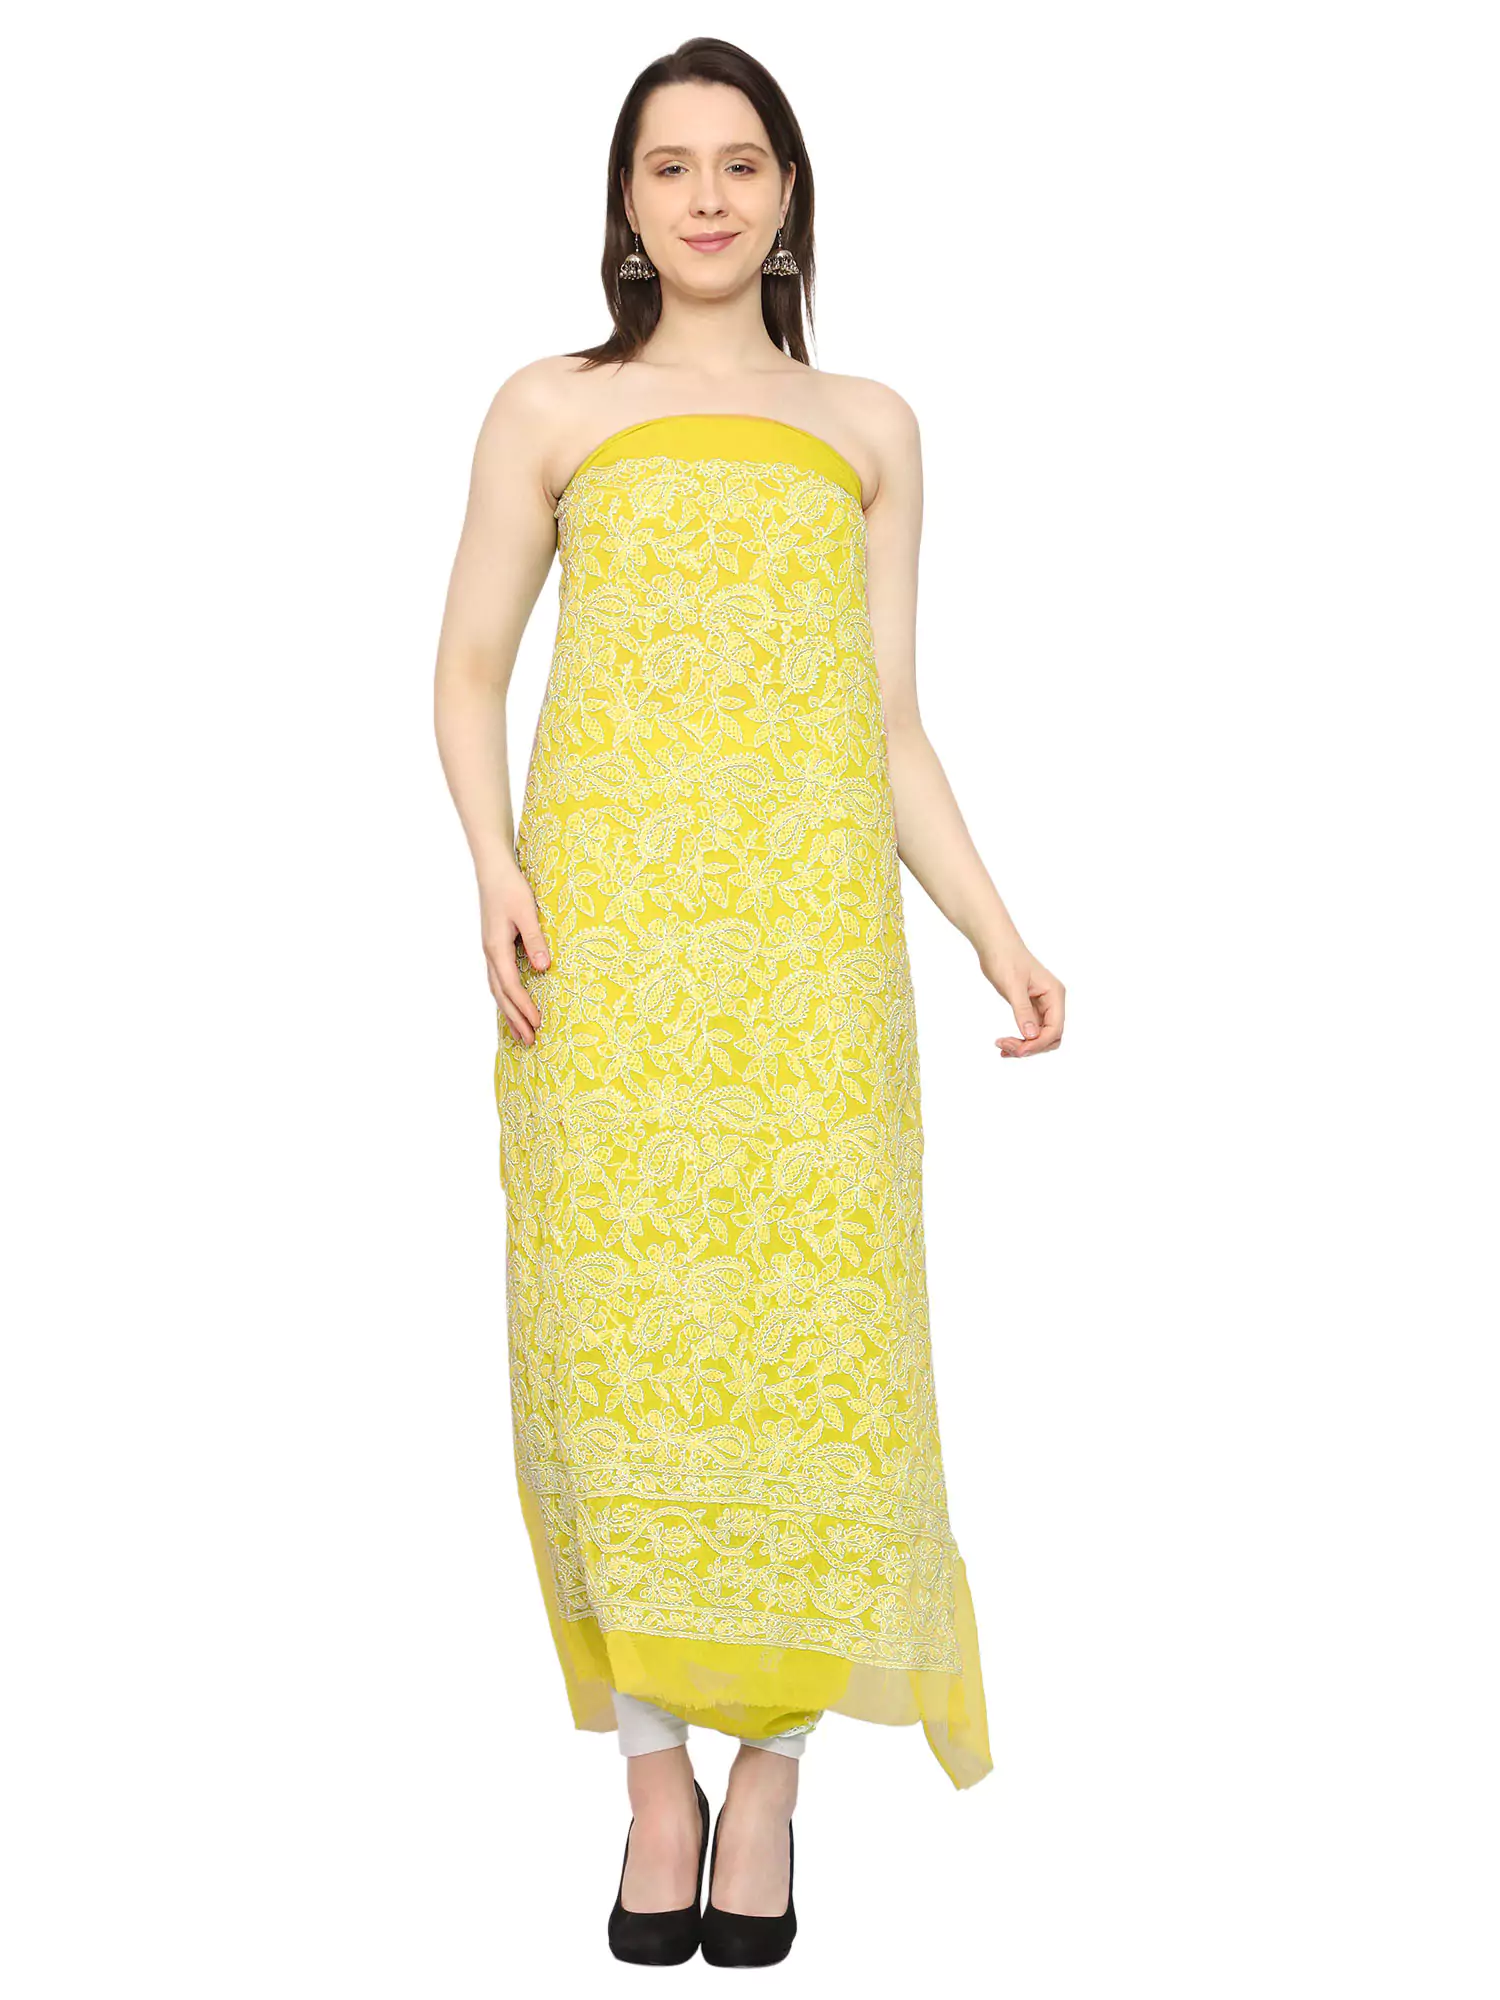 Lavangi Lucknow Chikan Yellow Georgette Front Jaal Unstitched Dress Material for Kurta, Bottom & Dupatta